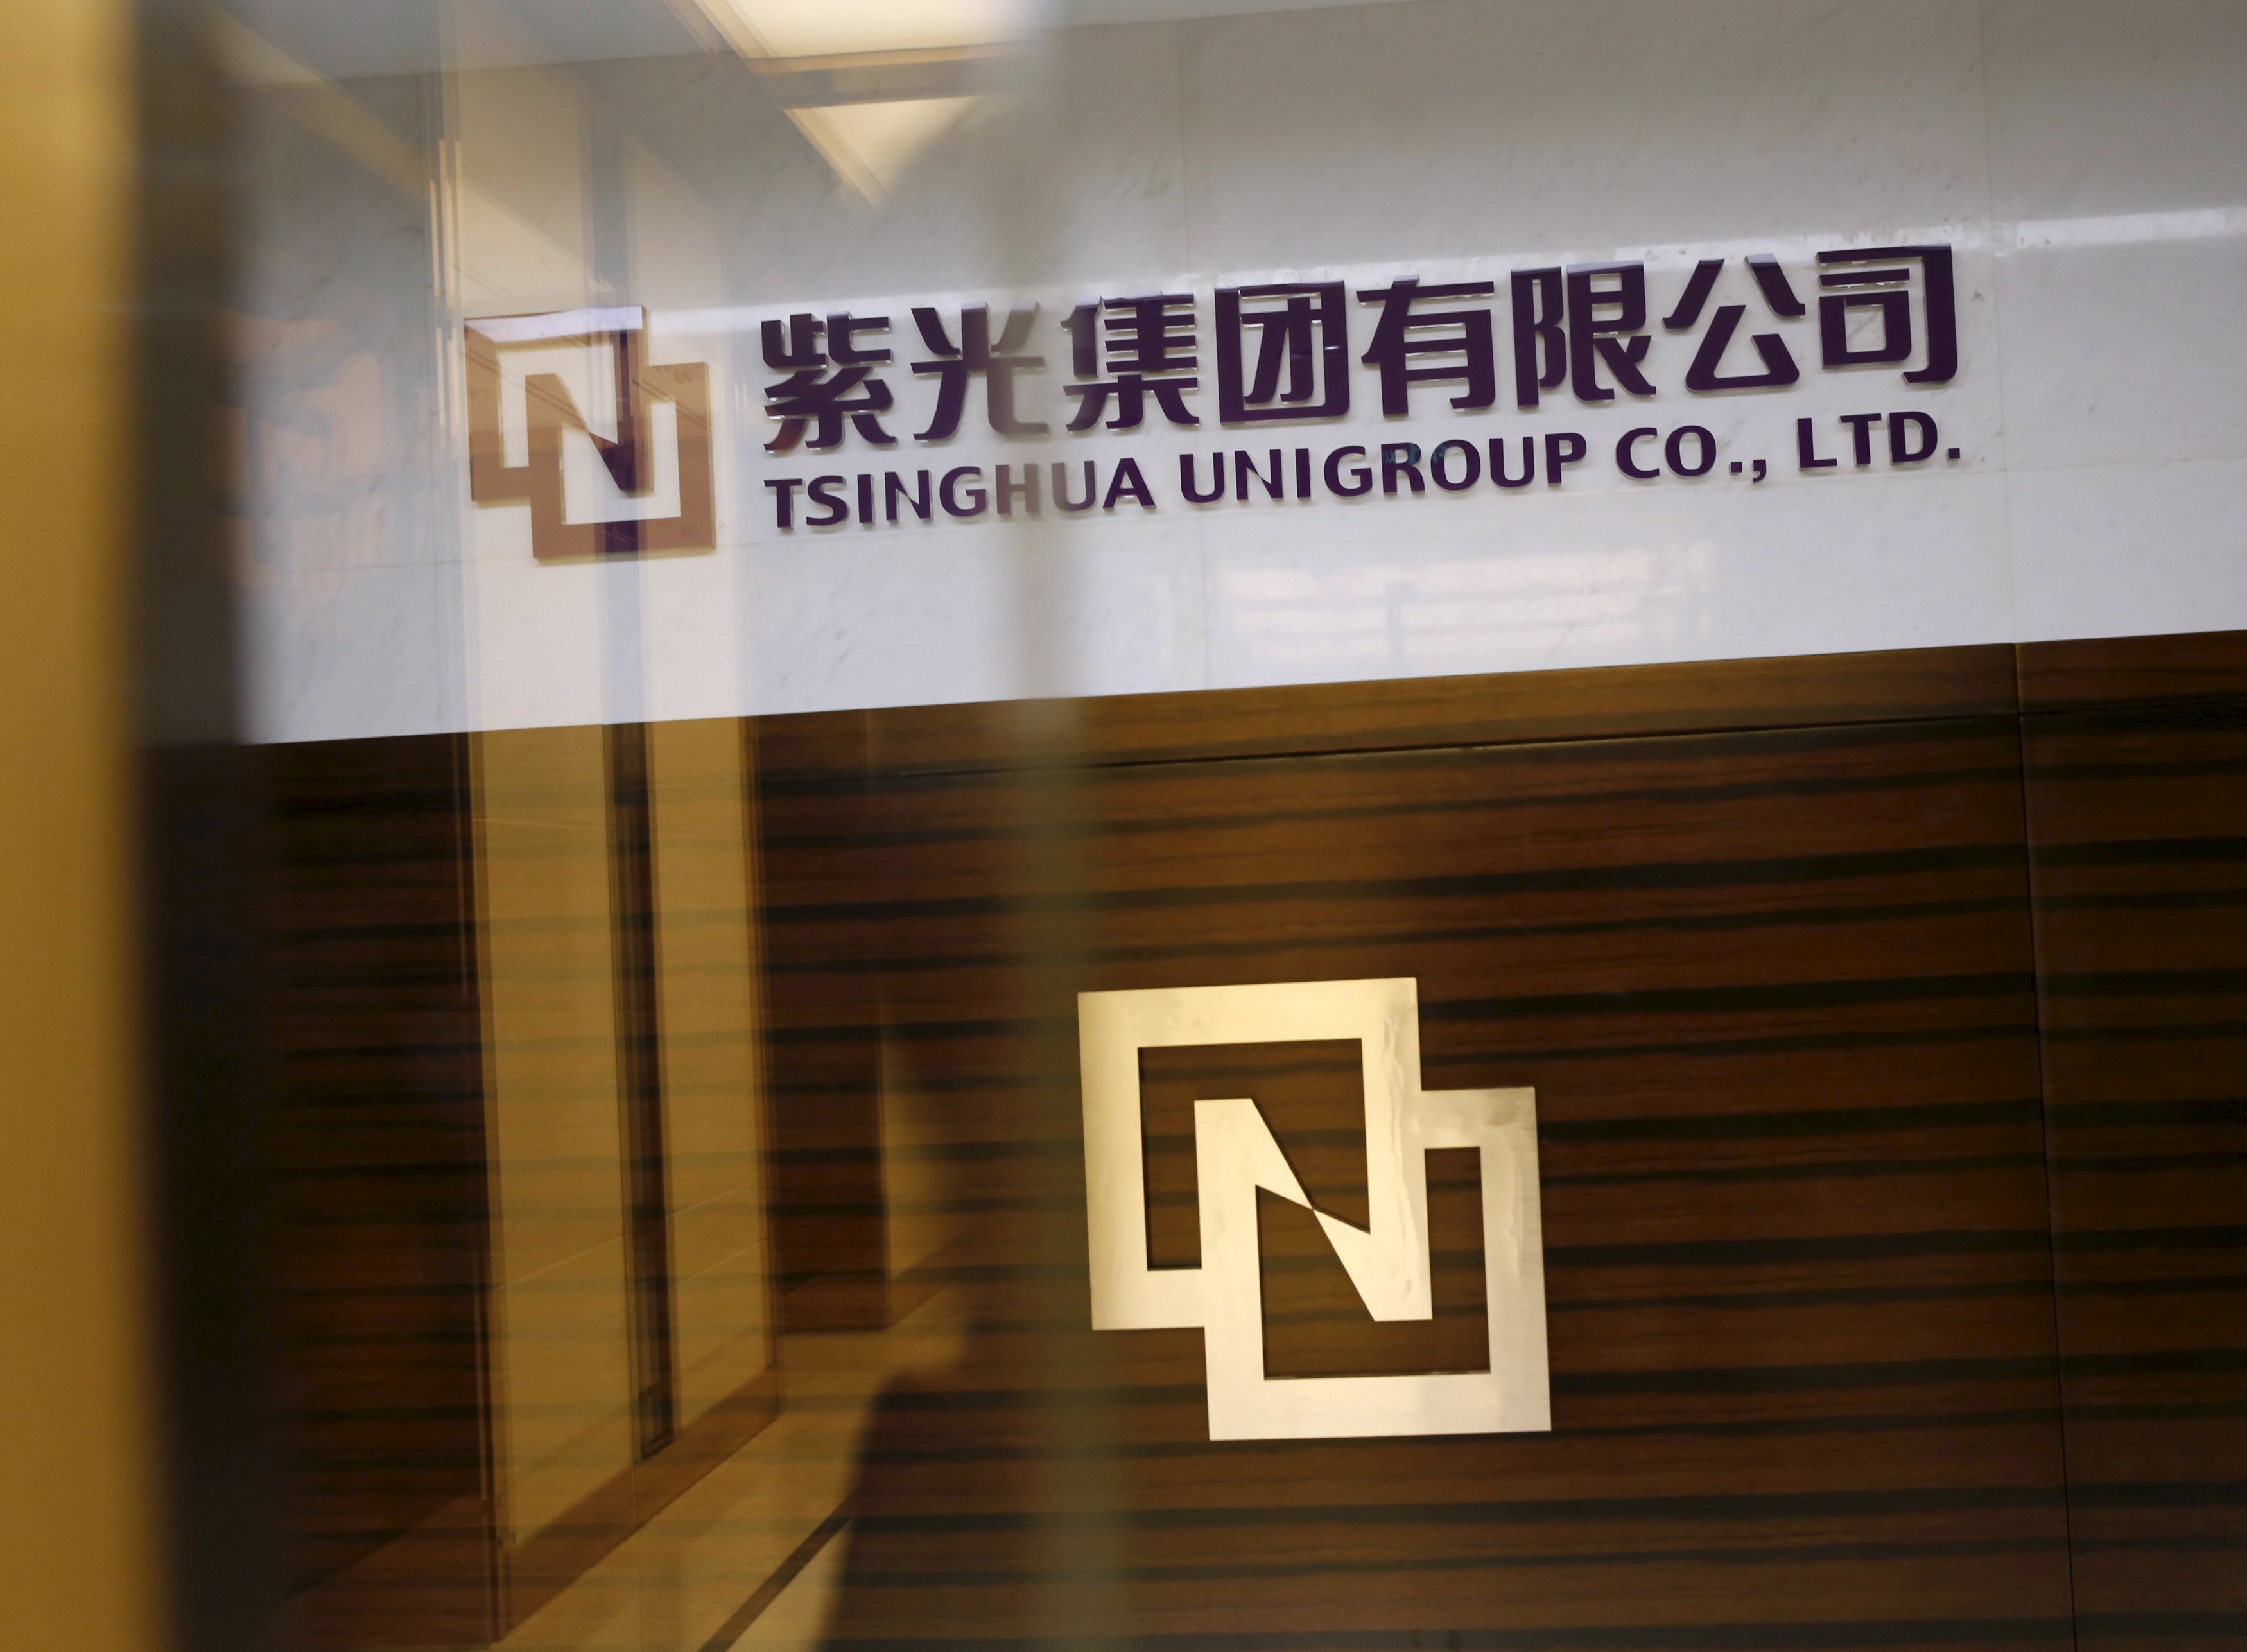 Tsinghua Unigroup logo is seen at its office in Beijing, China, November 15, 2015. China's Tsinghua Unigroup Ltd plans to invest 300 billion yuan ($47 billion) over the next five years to build the world's third-biggest chipmaker, the chairman of the state-backed technology conglomerate said on Monday. Chairman Zhao Weiguo told Reuters in an interview that Tsinghua Unigroup, controlled by Beijing's elite Tsinghua University which counts President Xi Jinping among its alumni, was in talks with a U.S.-based company involved in the chip industry. Picture taken November 15, 2015. REUTERS/Kim Kyung-Hoon